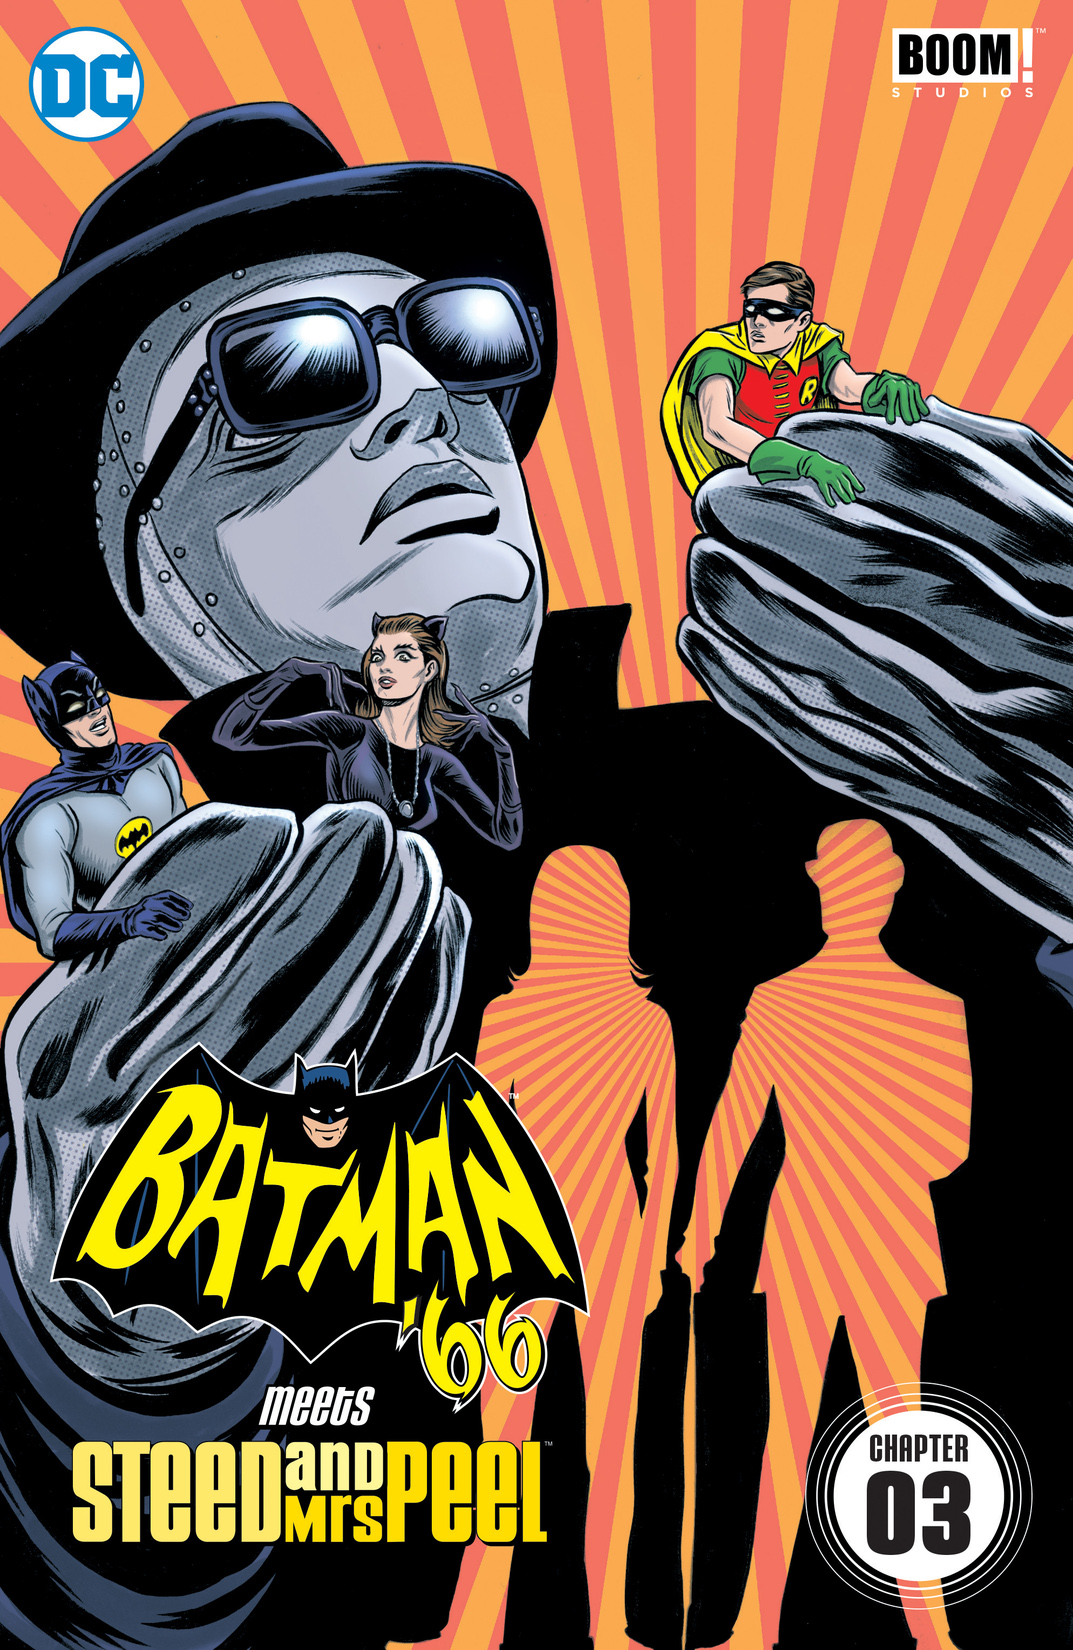 Batman '66 Meets Steed and Mrs Peel #3 preview images